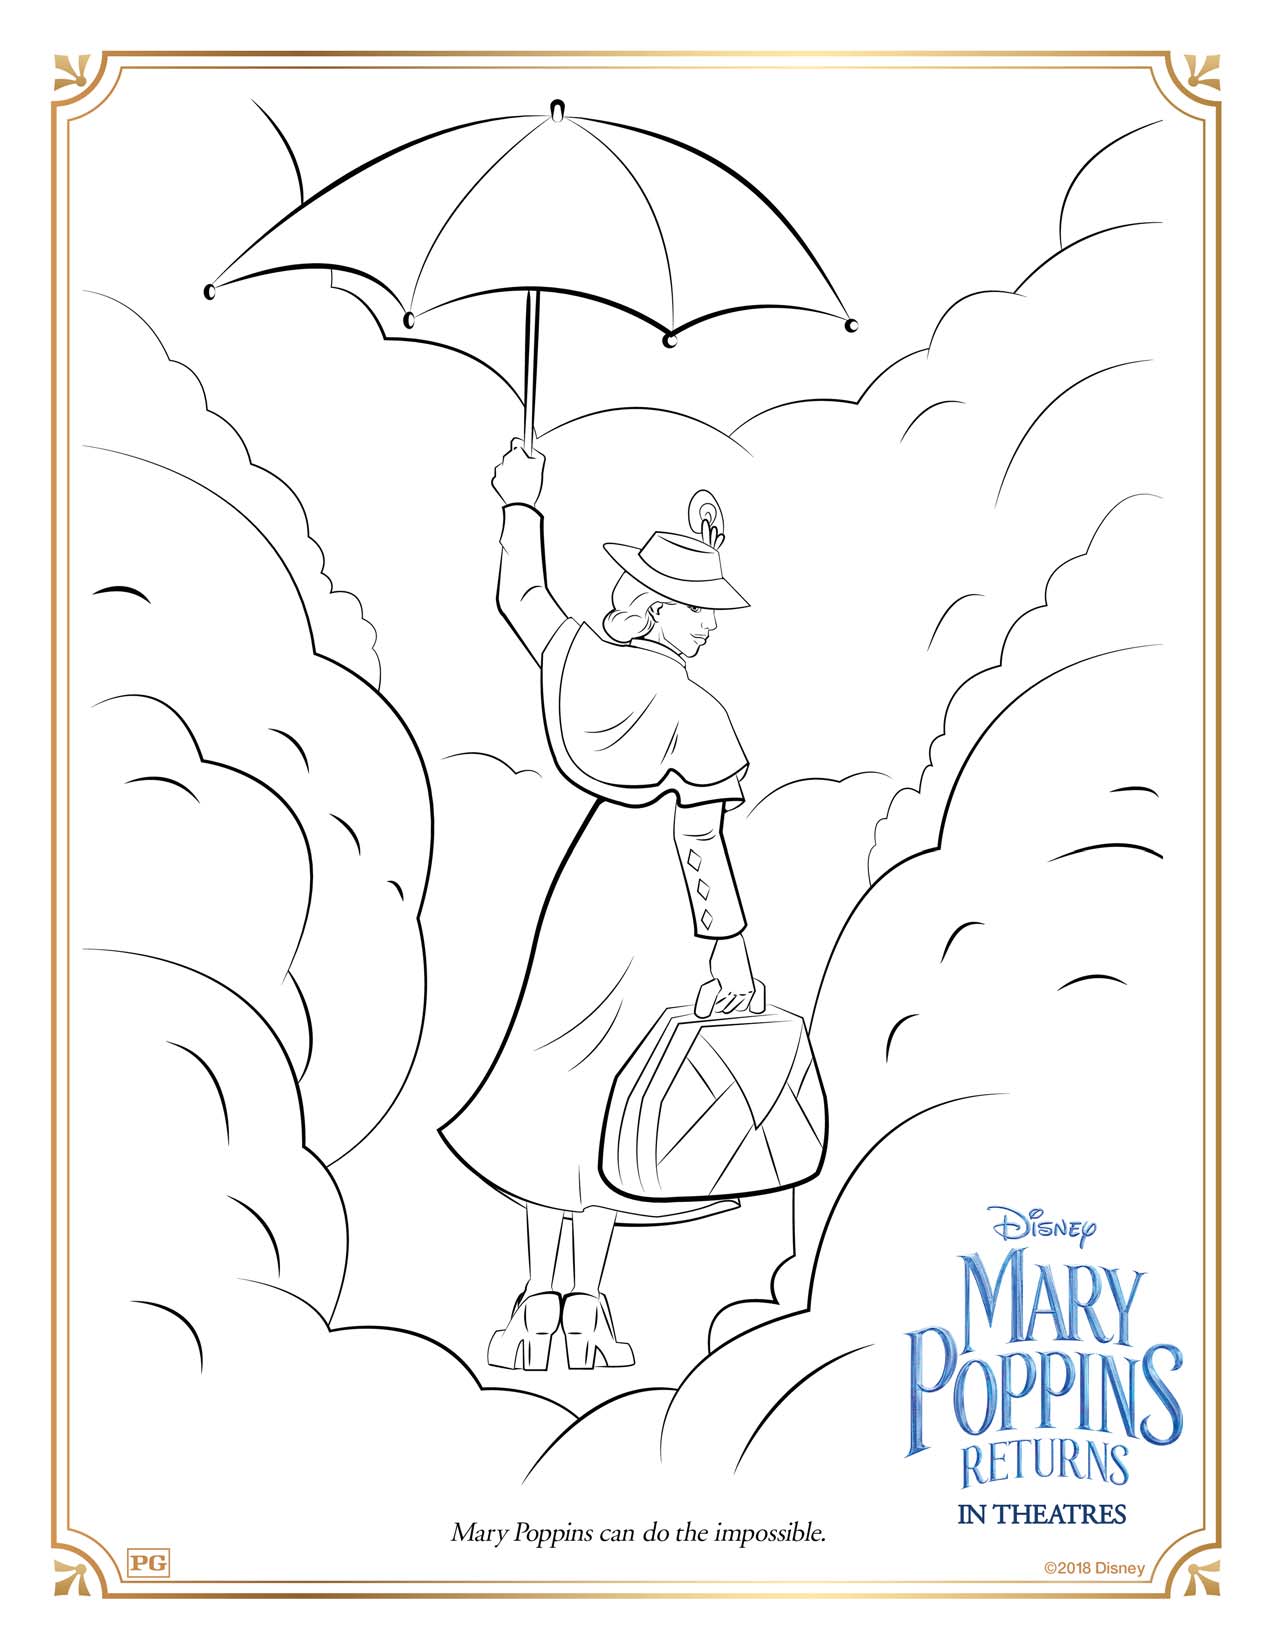 Mary Poppins Stickers for Sale  Redbubble